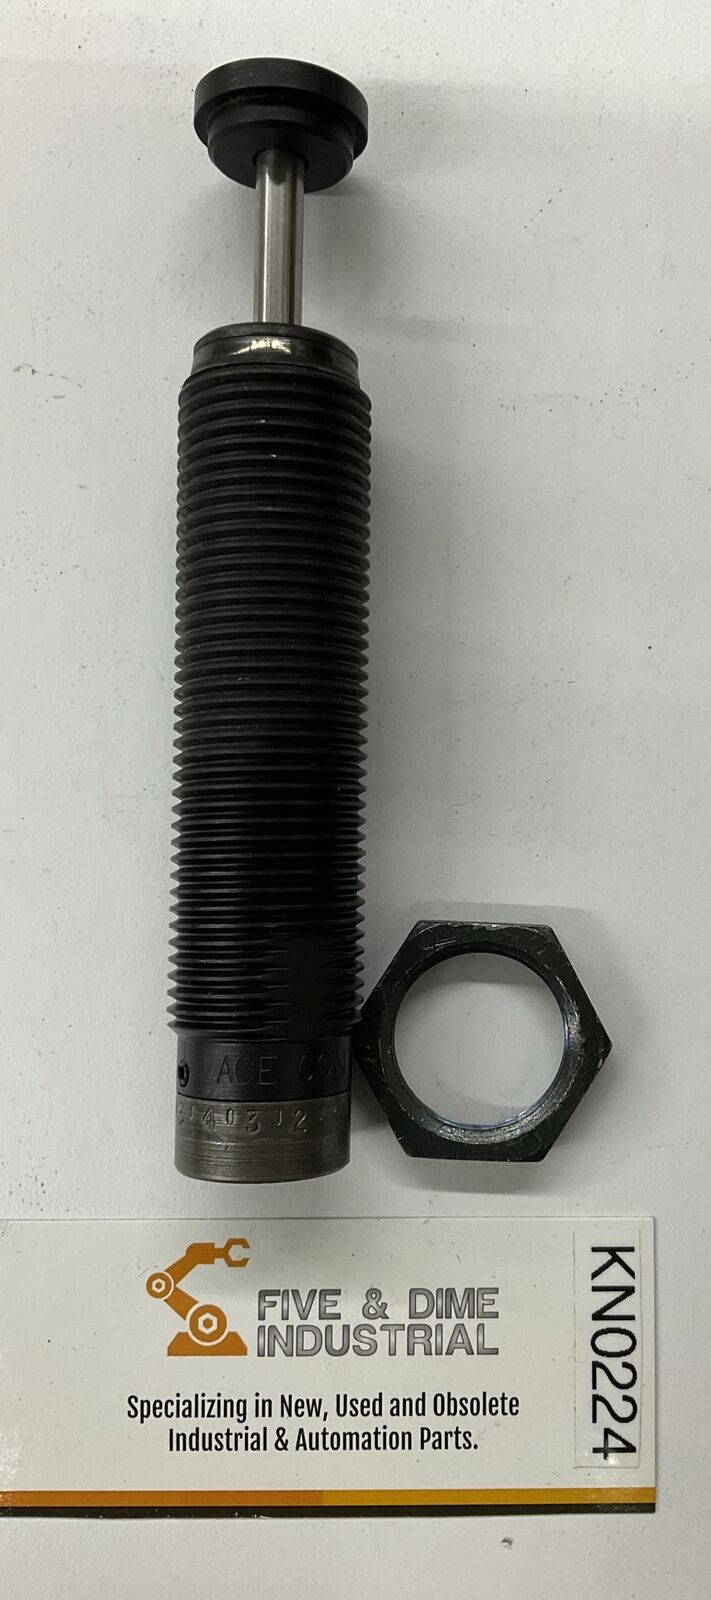 ACE Controls MA600 / 126-0001 Shock Absorber (CL239)